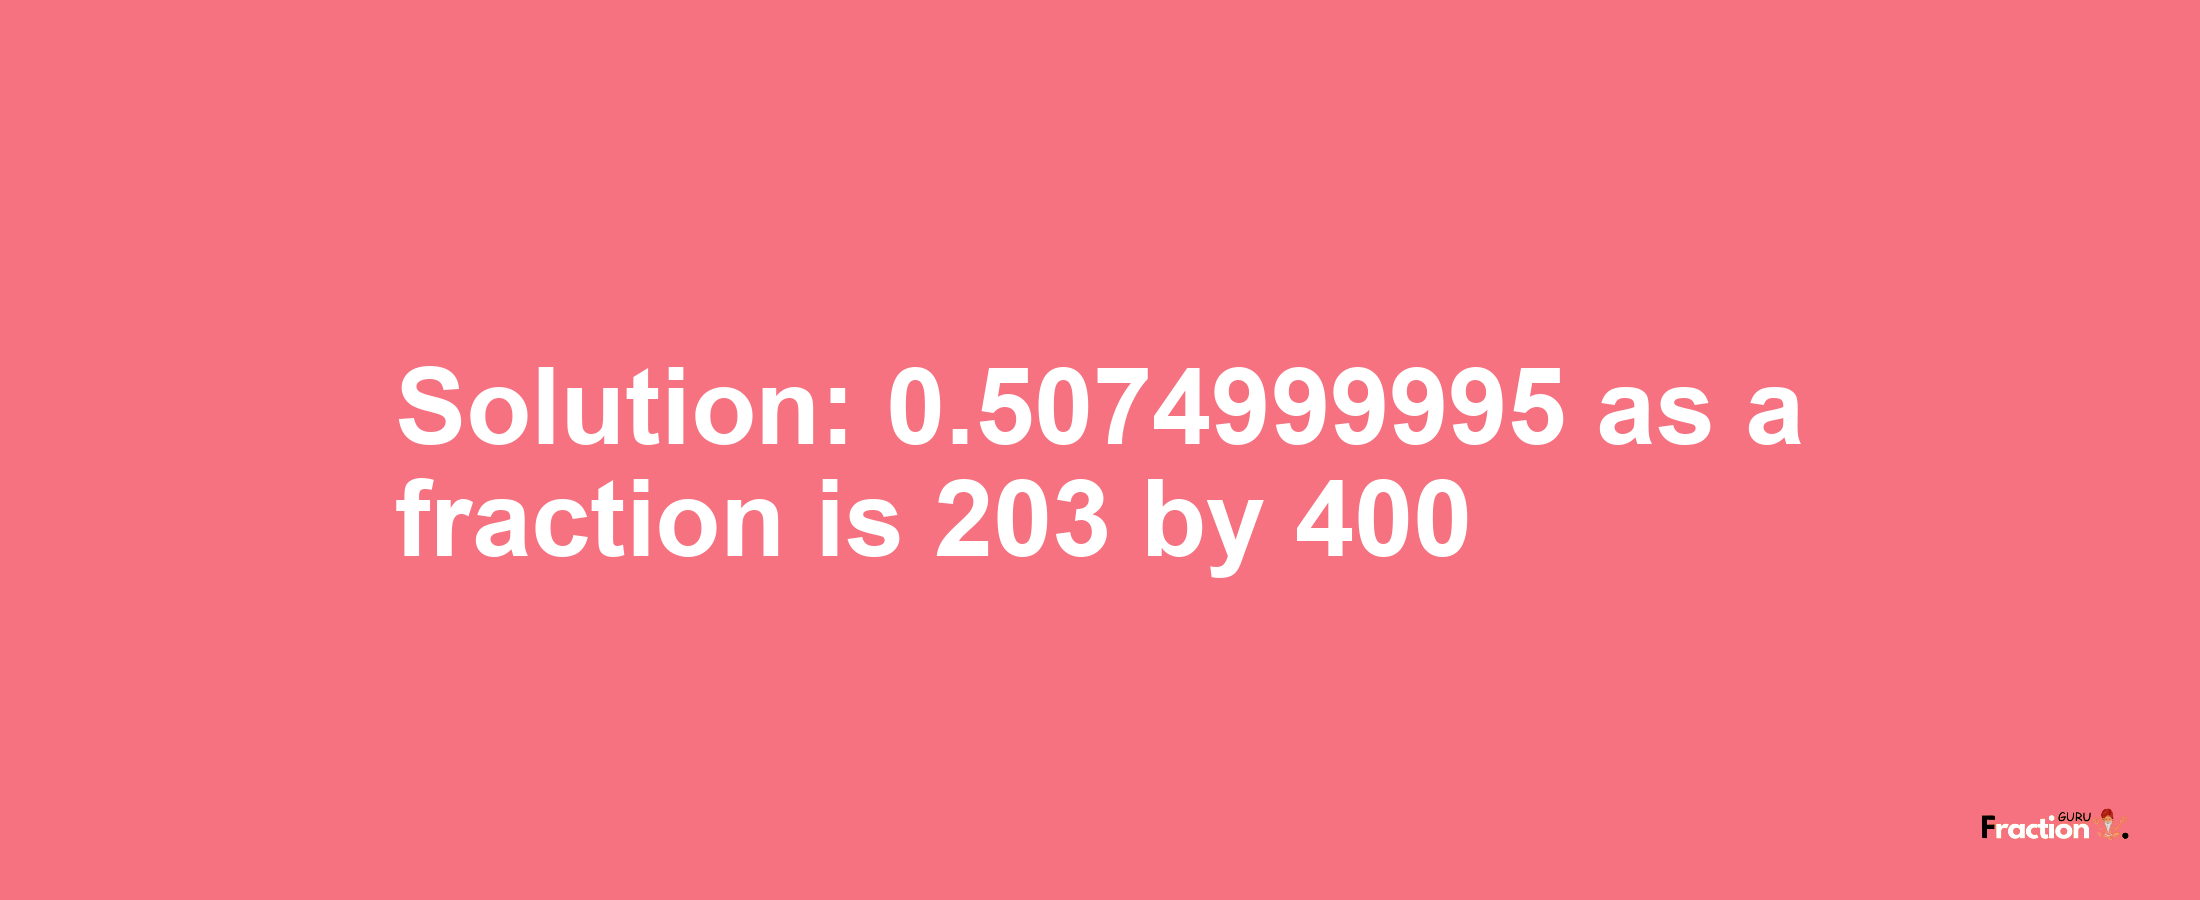 Solution:0.5074999995 as a fraction is 203/400